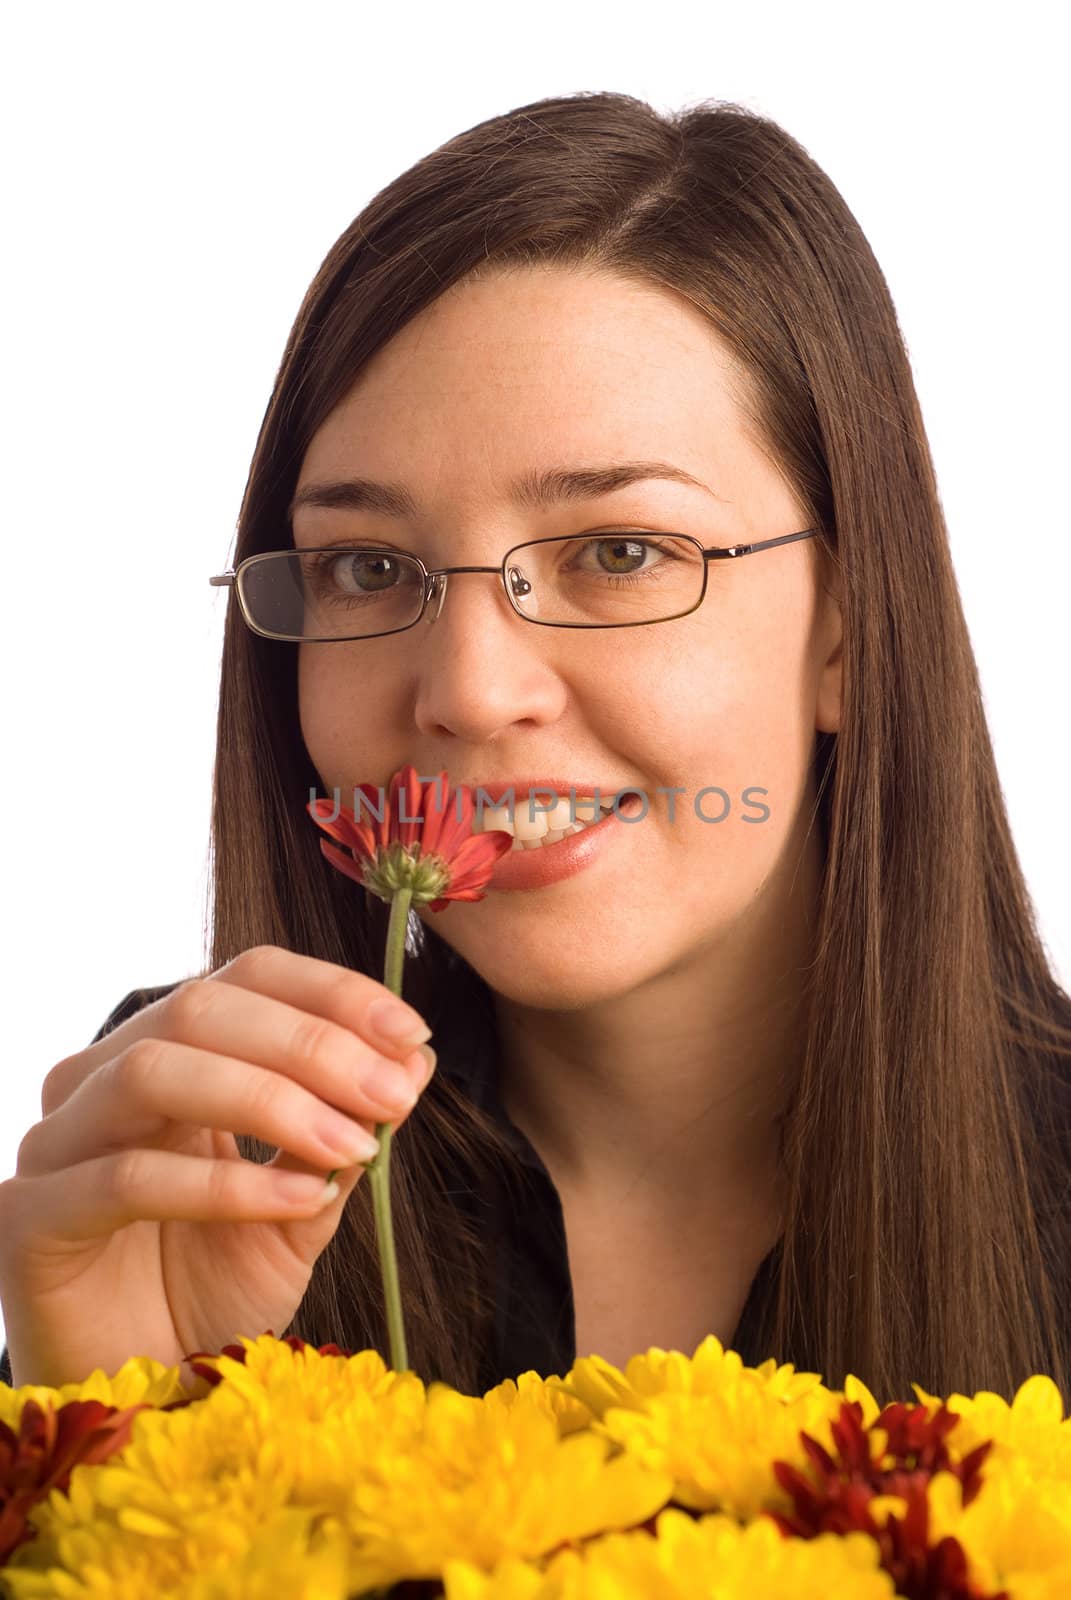 Secretary, assistant or student woman smelling valentine or gift flowers isolated on white and looking at camera